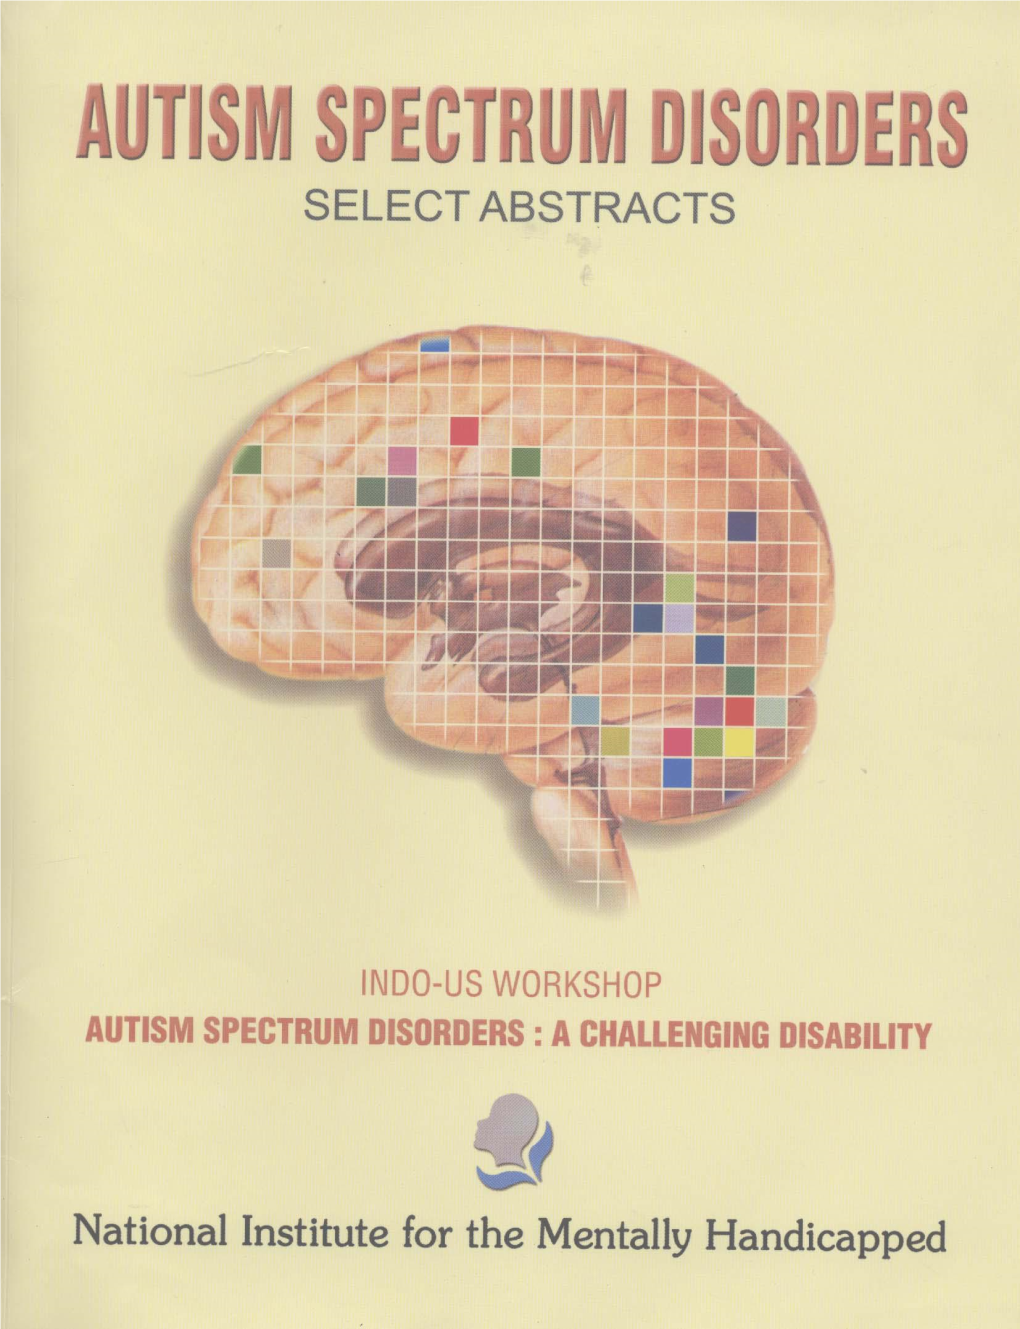 Autism Spectrum Disorders Select Abstracts